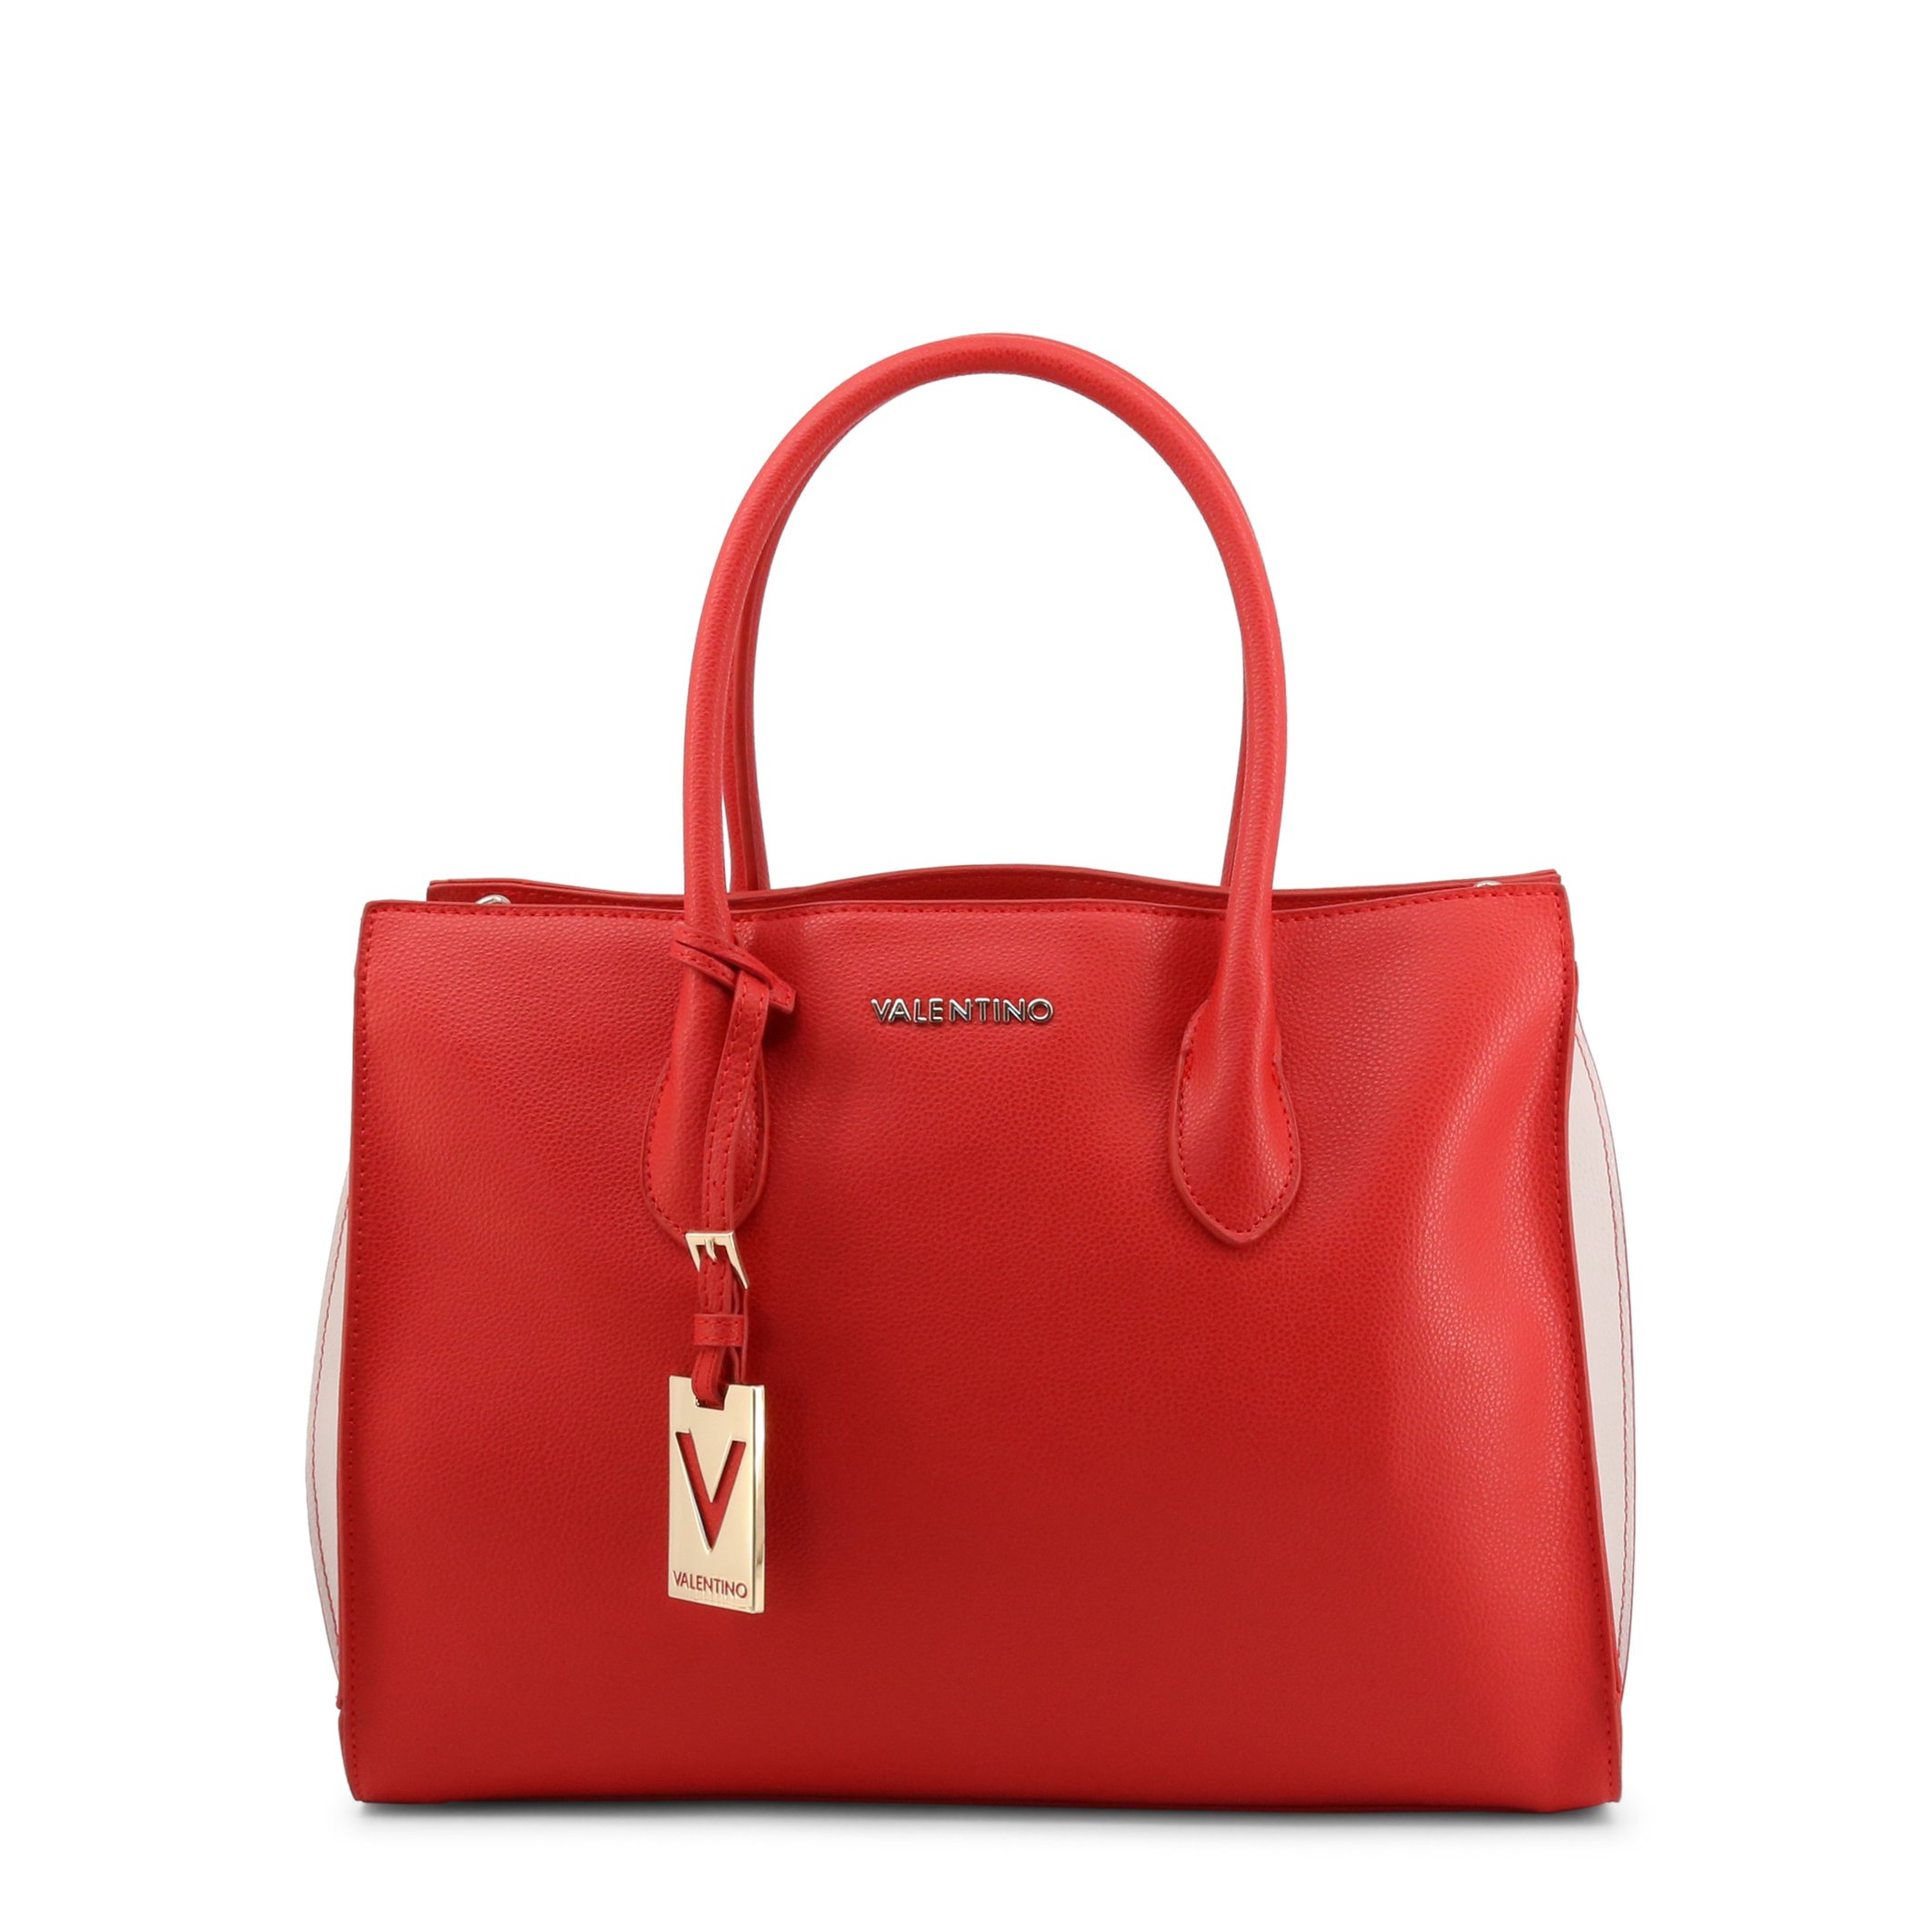 Valentino by Mario Valentino Women's Shoulder Bag Various Colours SUMMER MEMENTO-VBS30104 - red NOSIZE